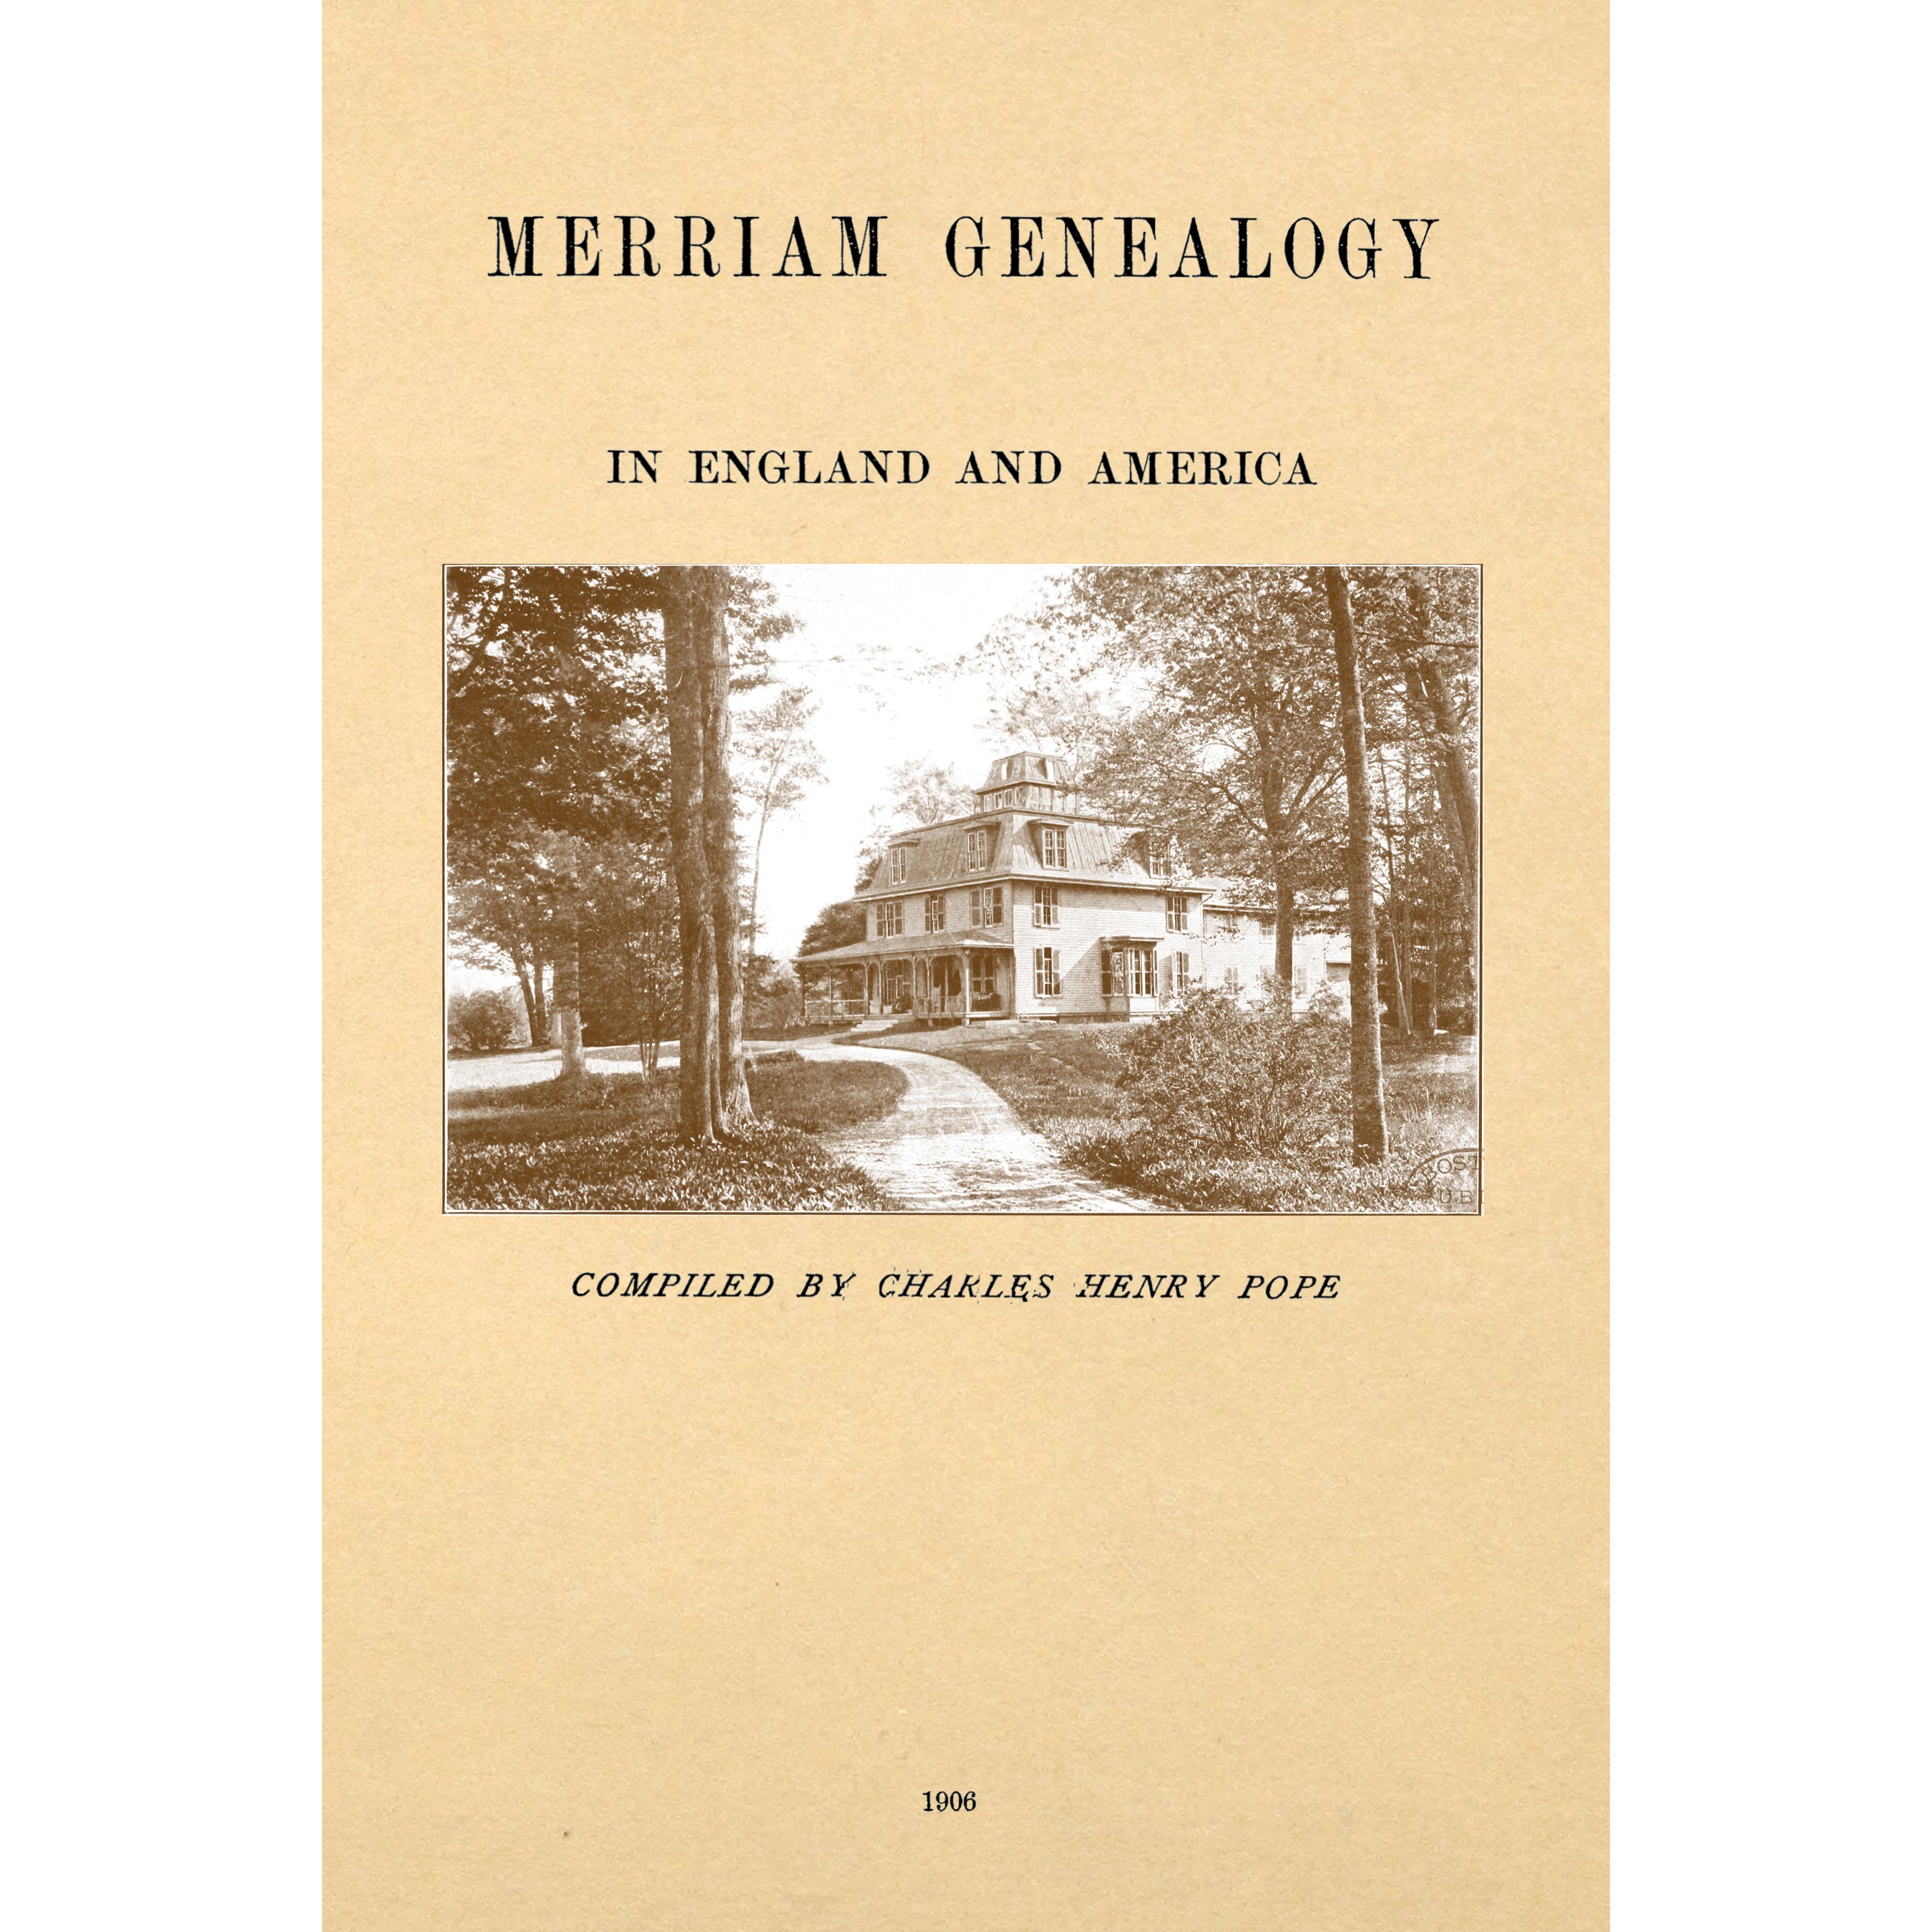 Merriam genealogy in England and America